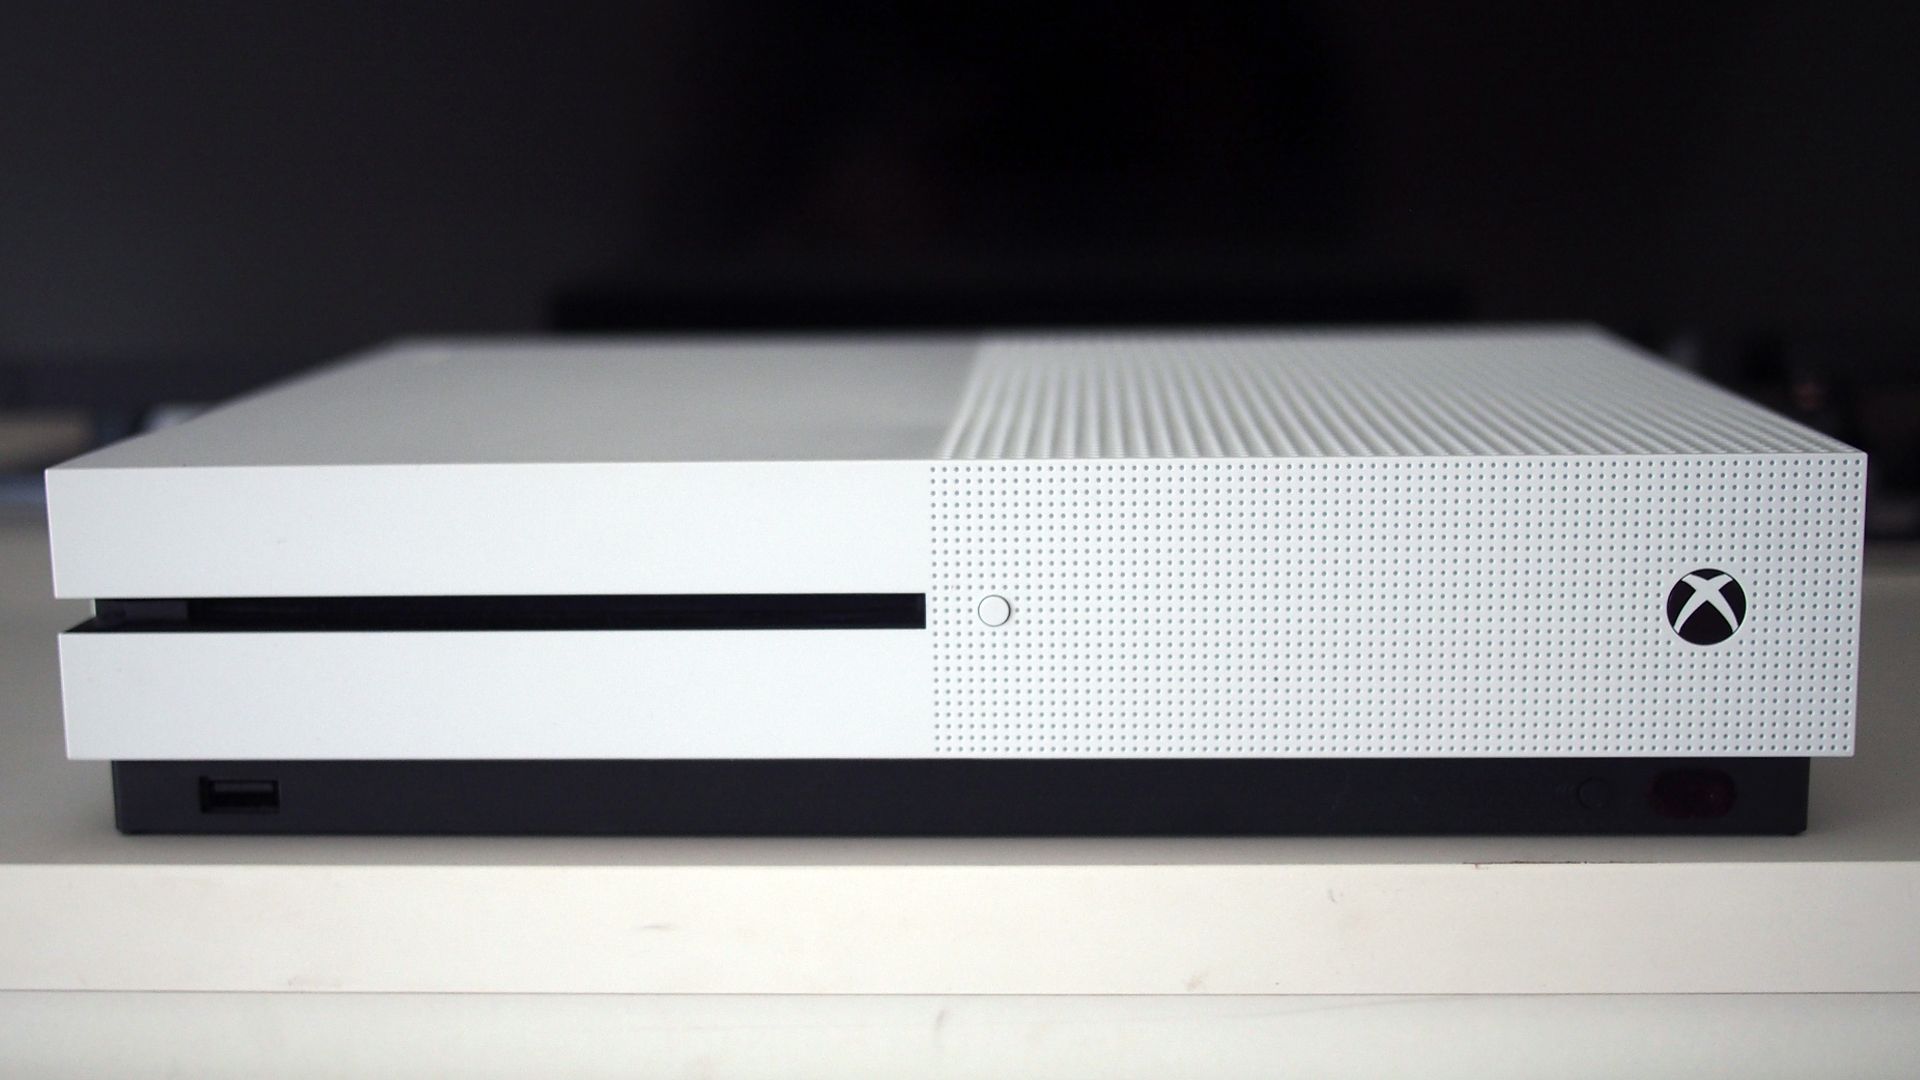 Xbox One S: The smaller, handsomer, 4K-ier system we've been looking for